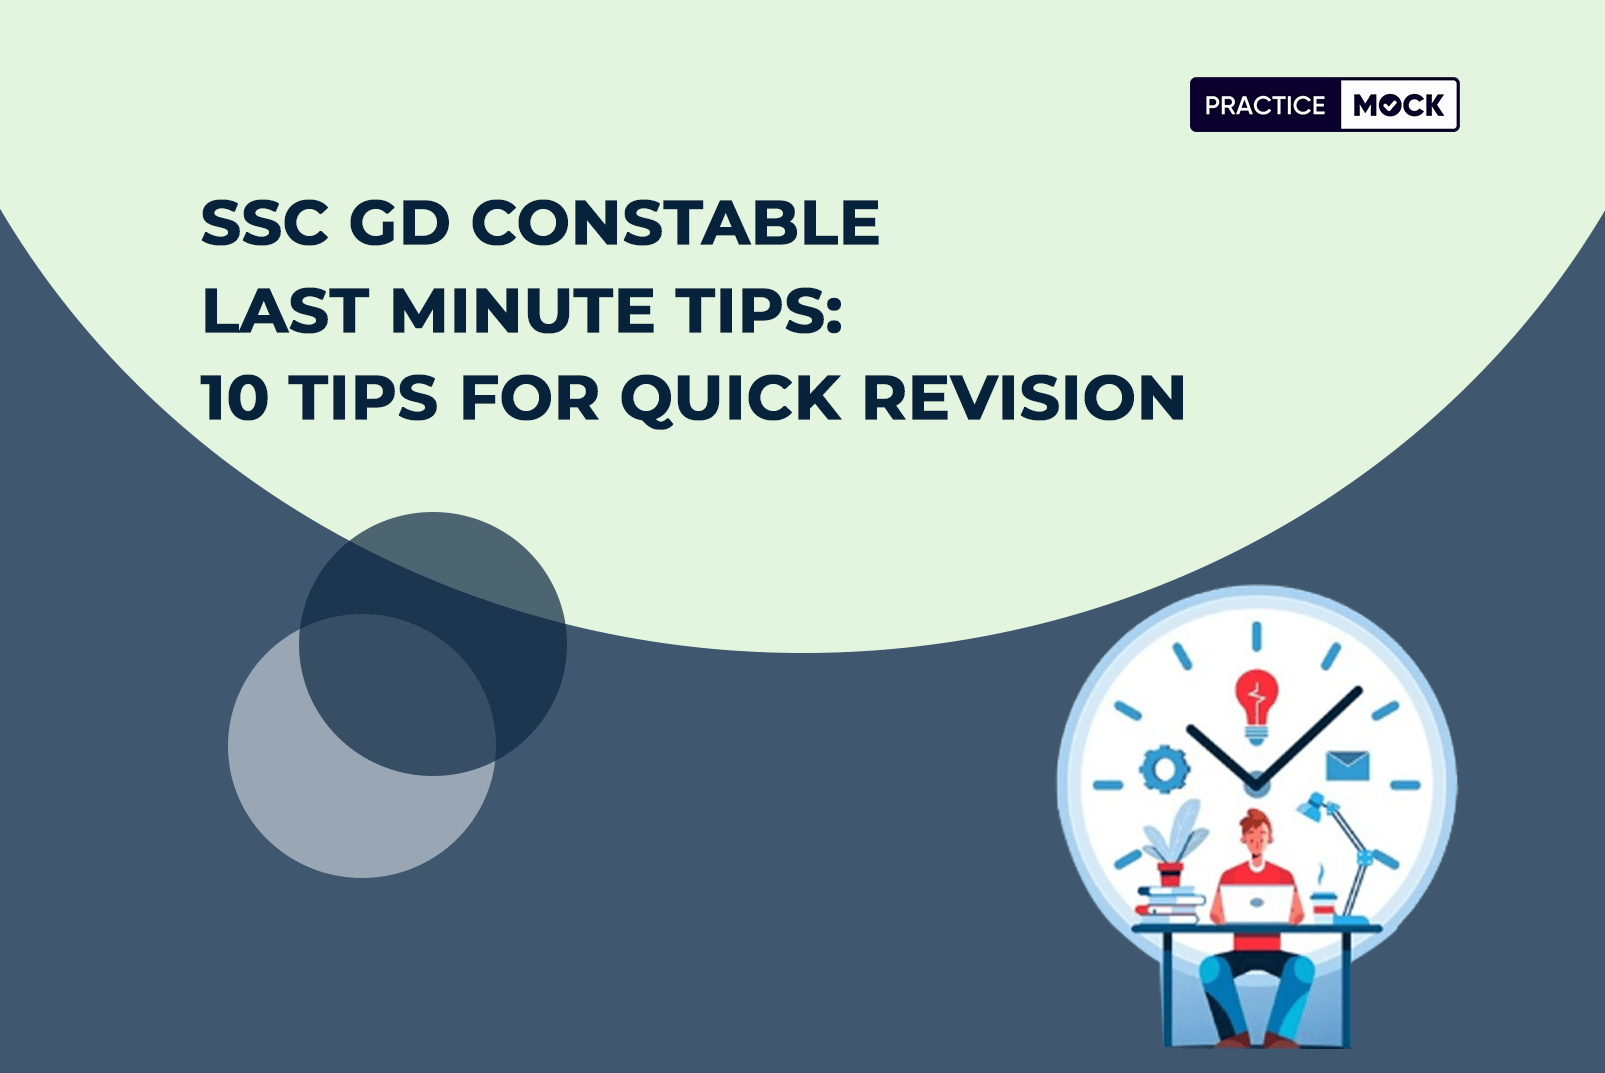 SSC GD Constable Last Minute Tips 10 Tips for Quick Revision